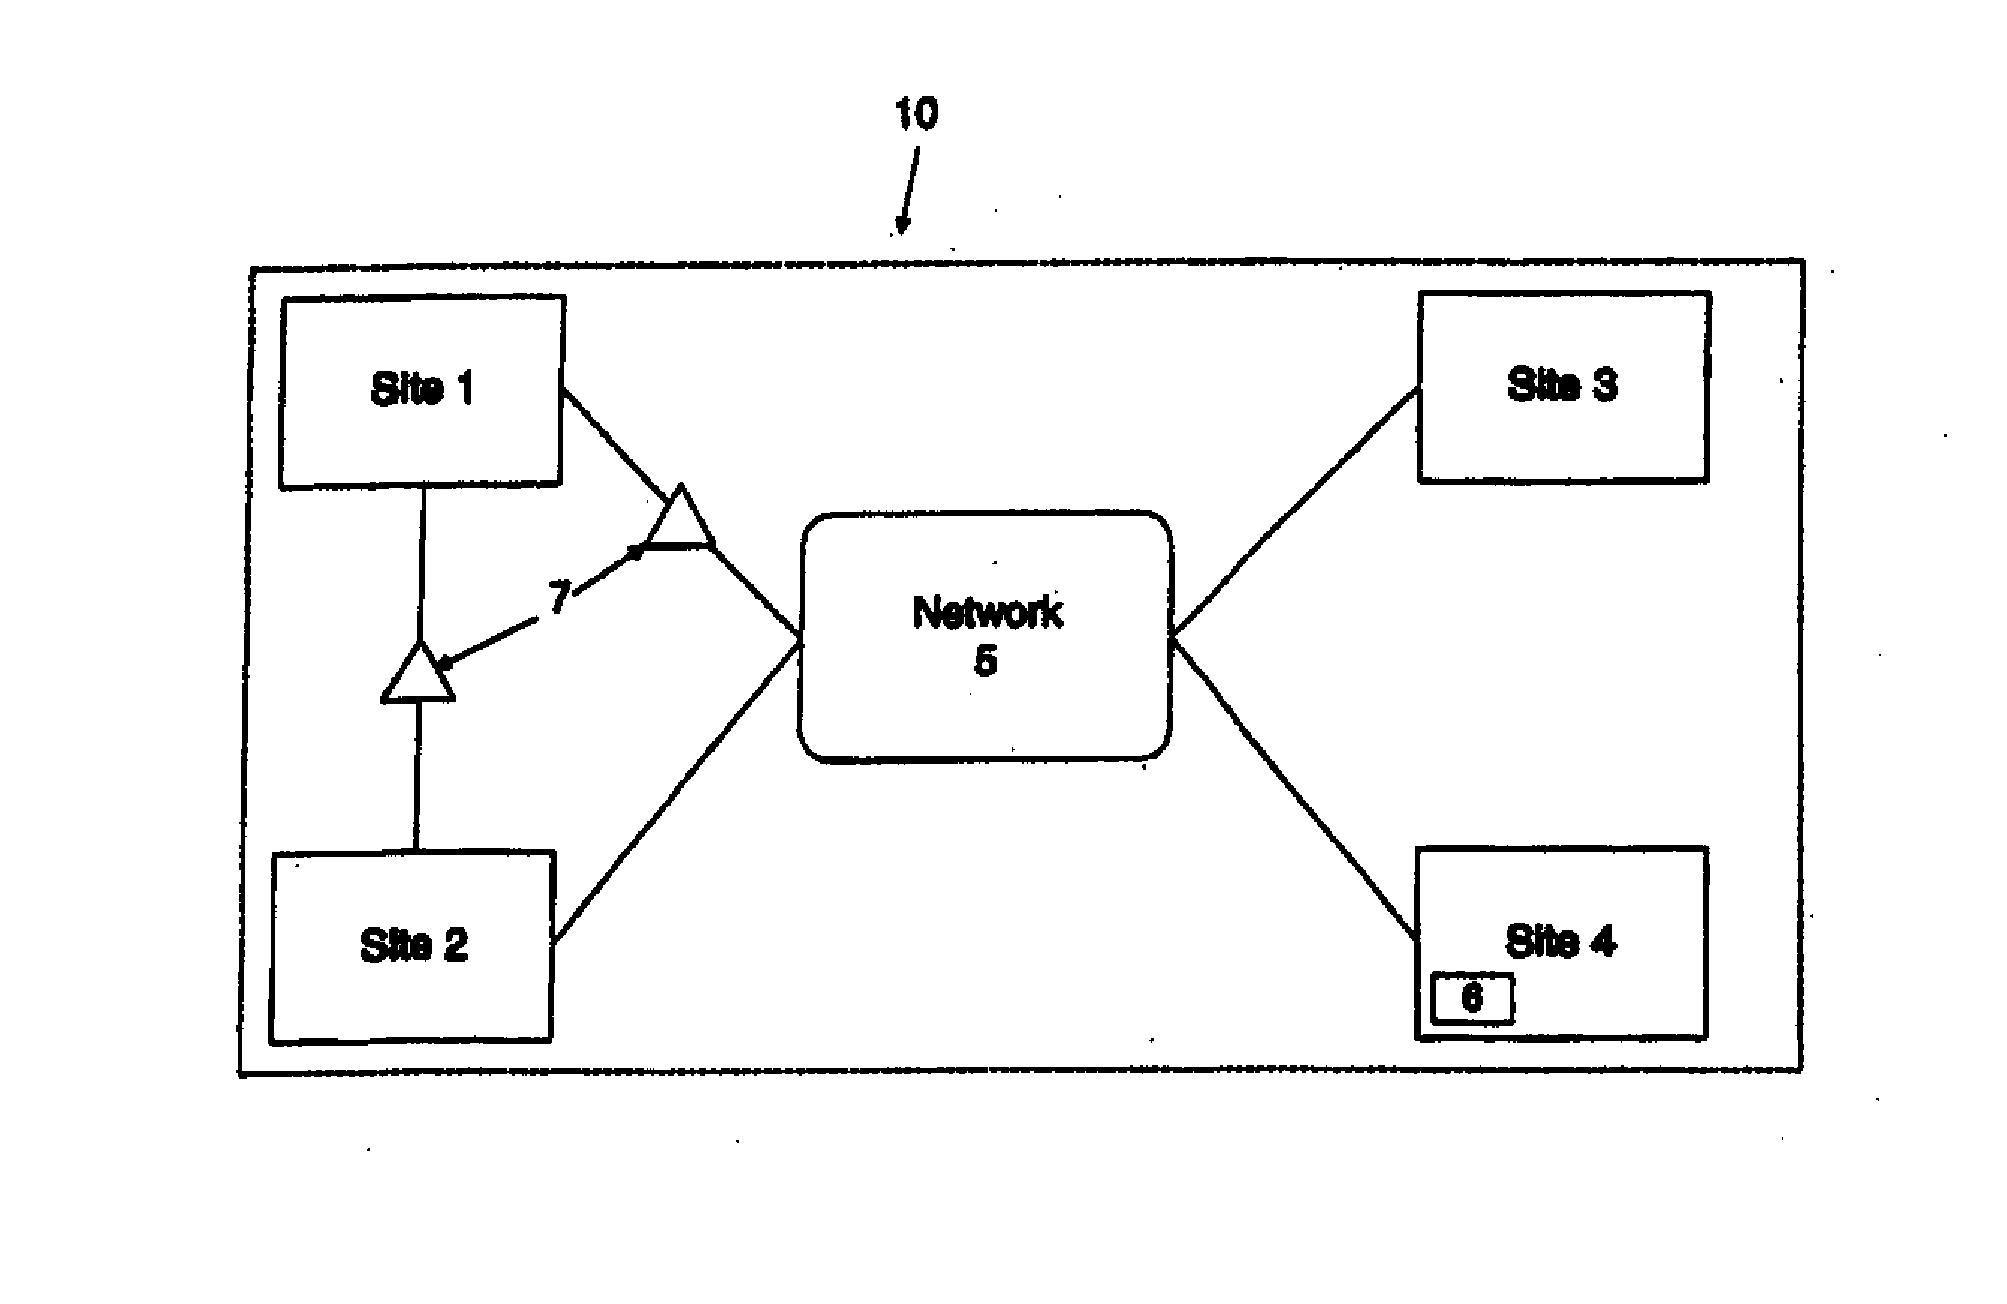 System and Method for Preventing Identity Theft or Misuse by Restricting Access